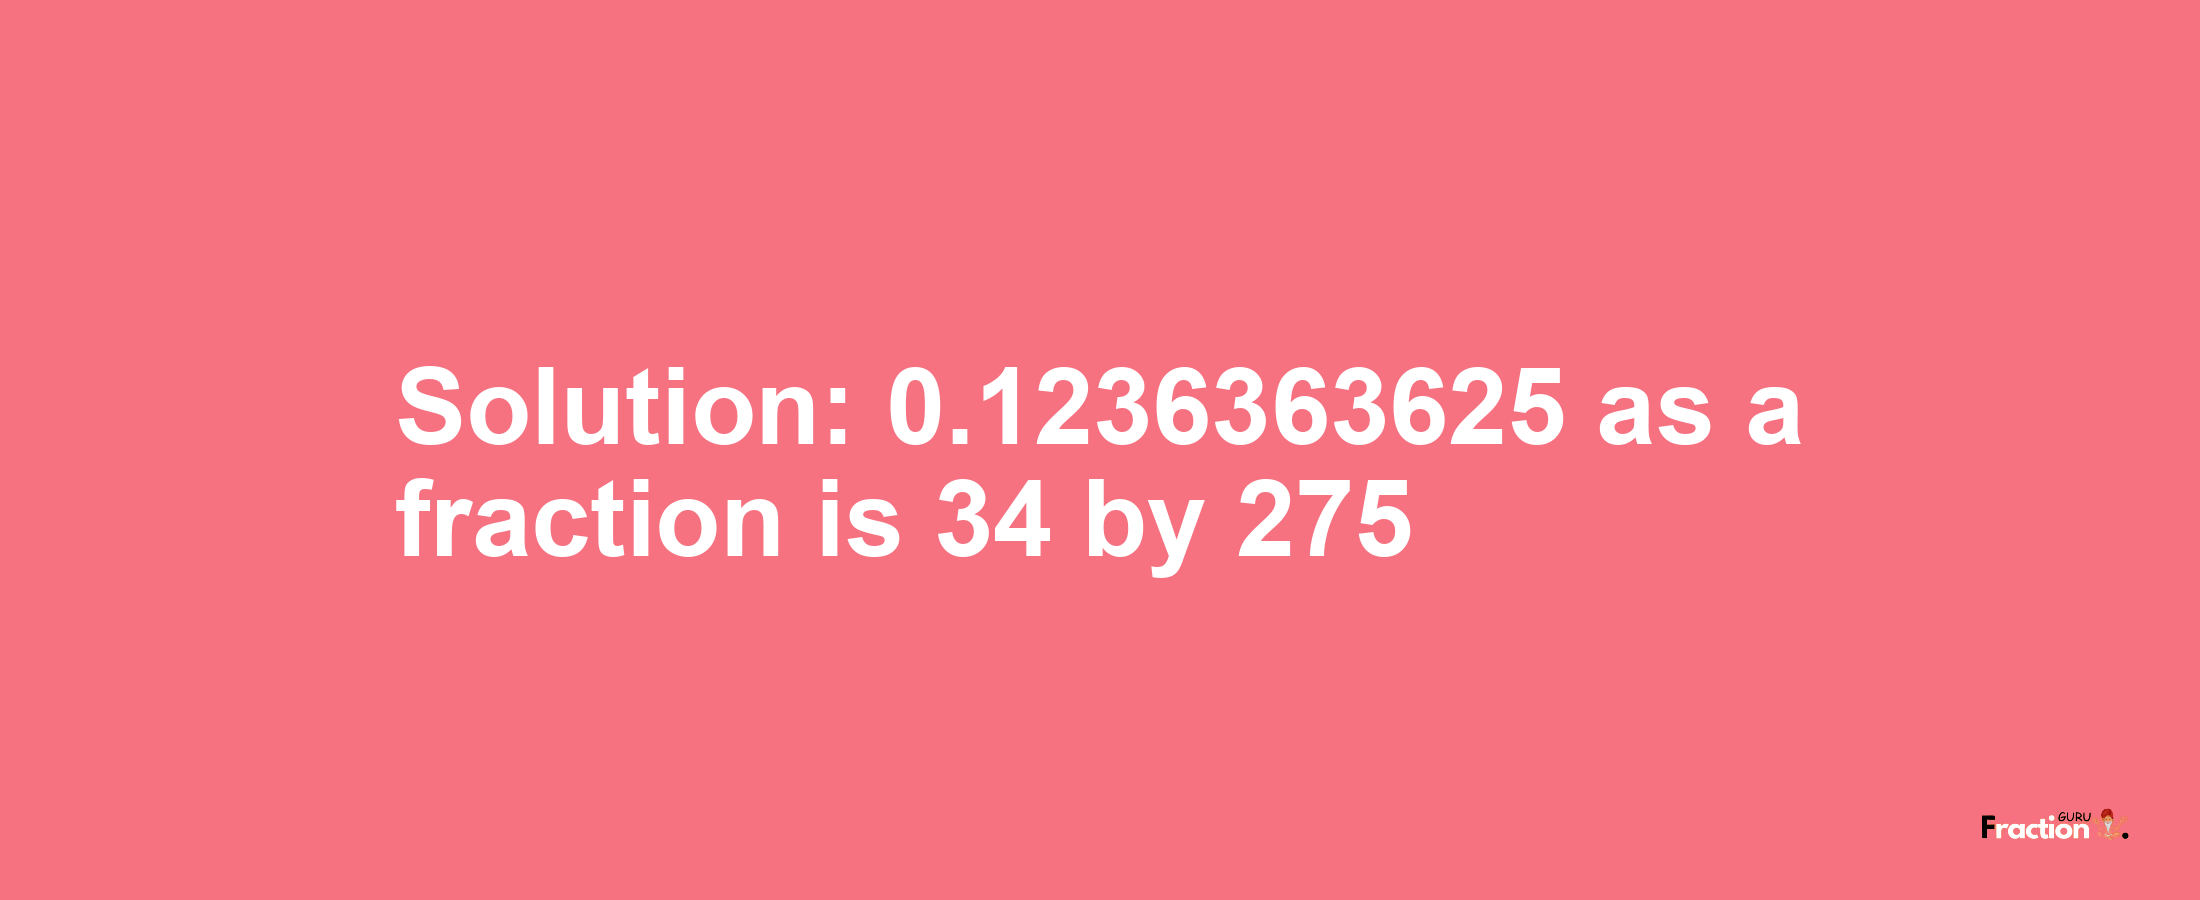 Solution:0.1236363625 as a fraction is 34/275